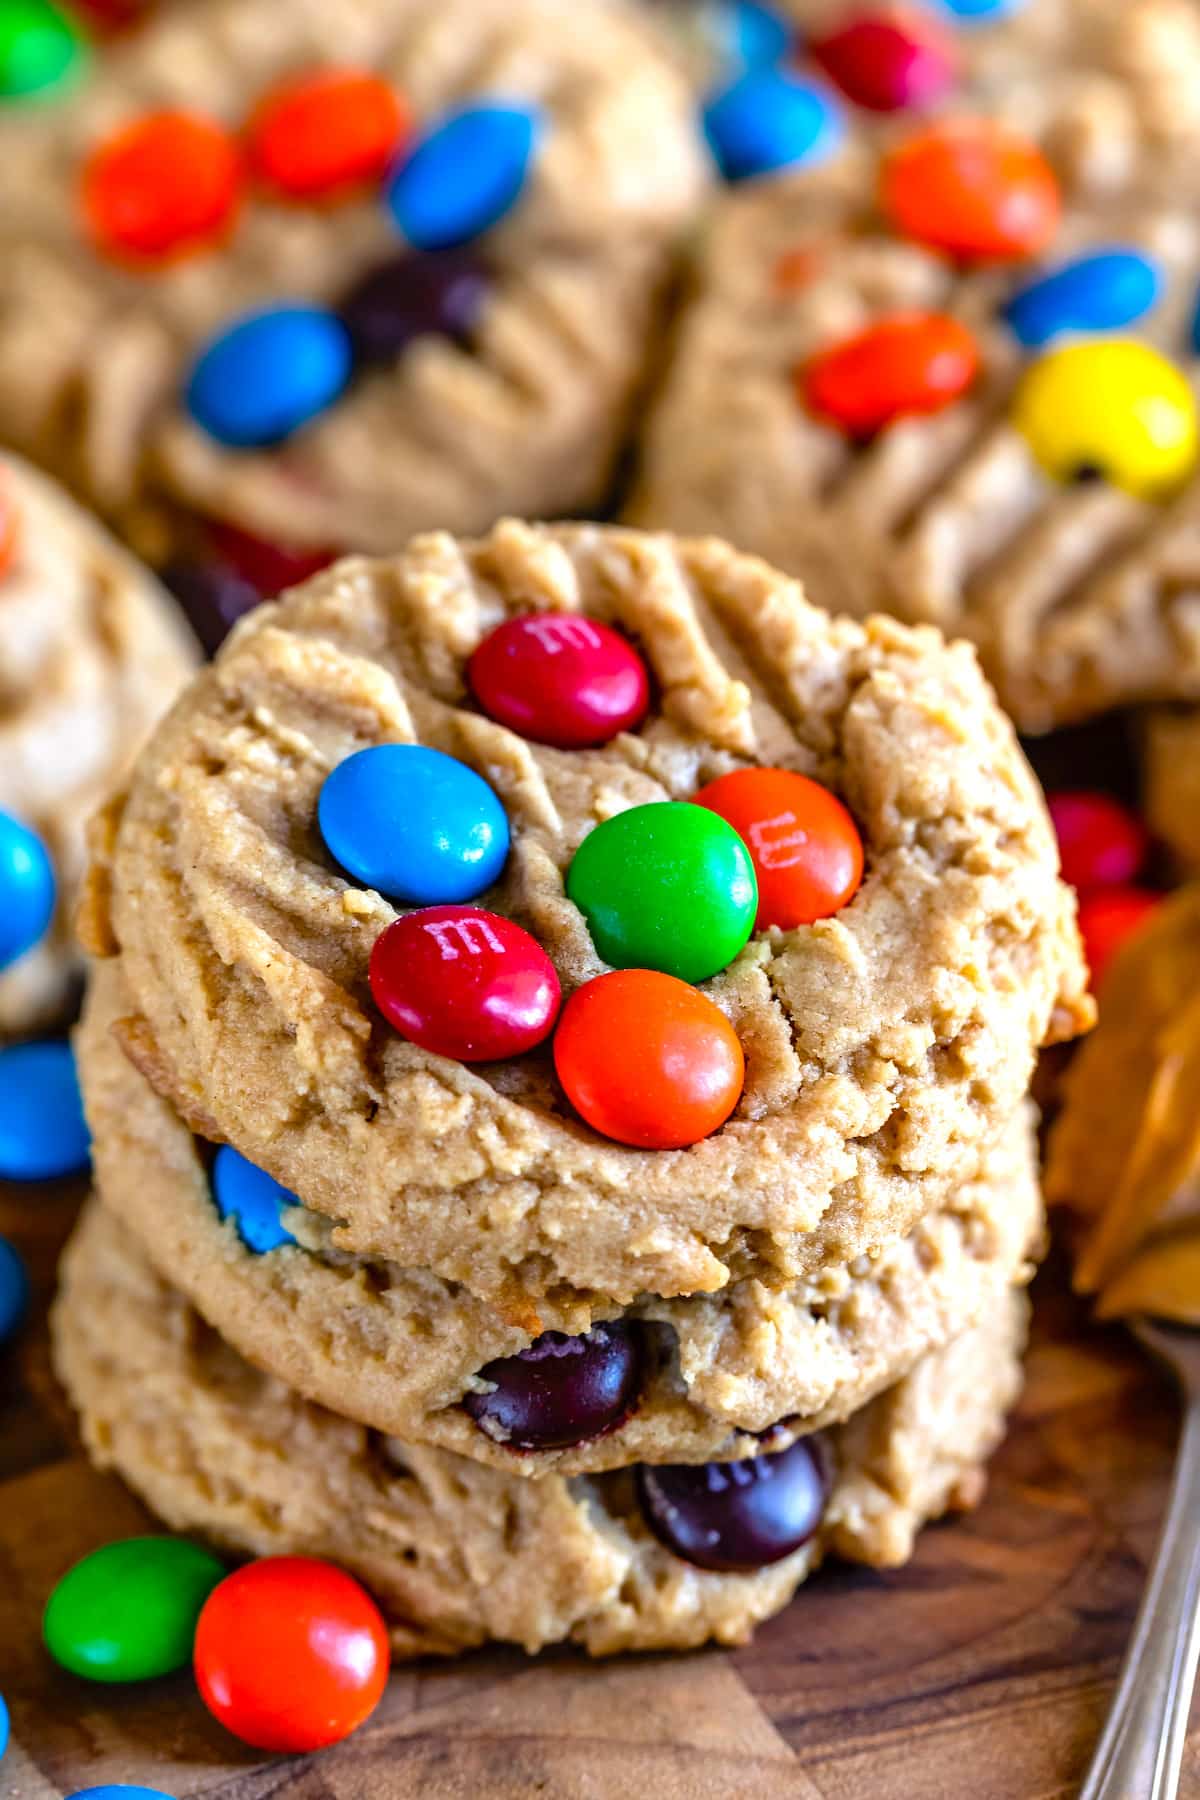 peanut butter cookies with colorful m&ms baked in.